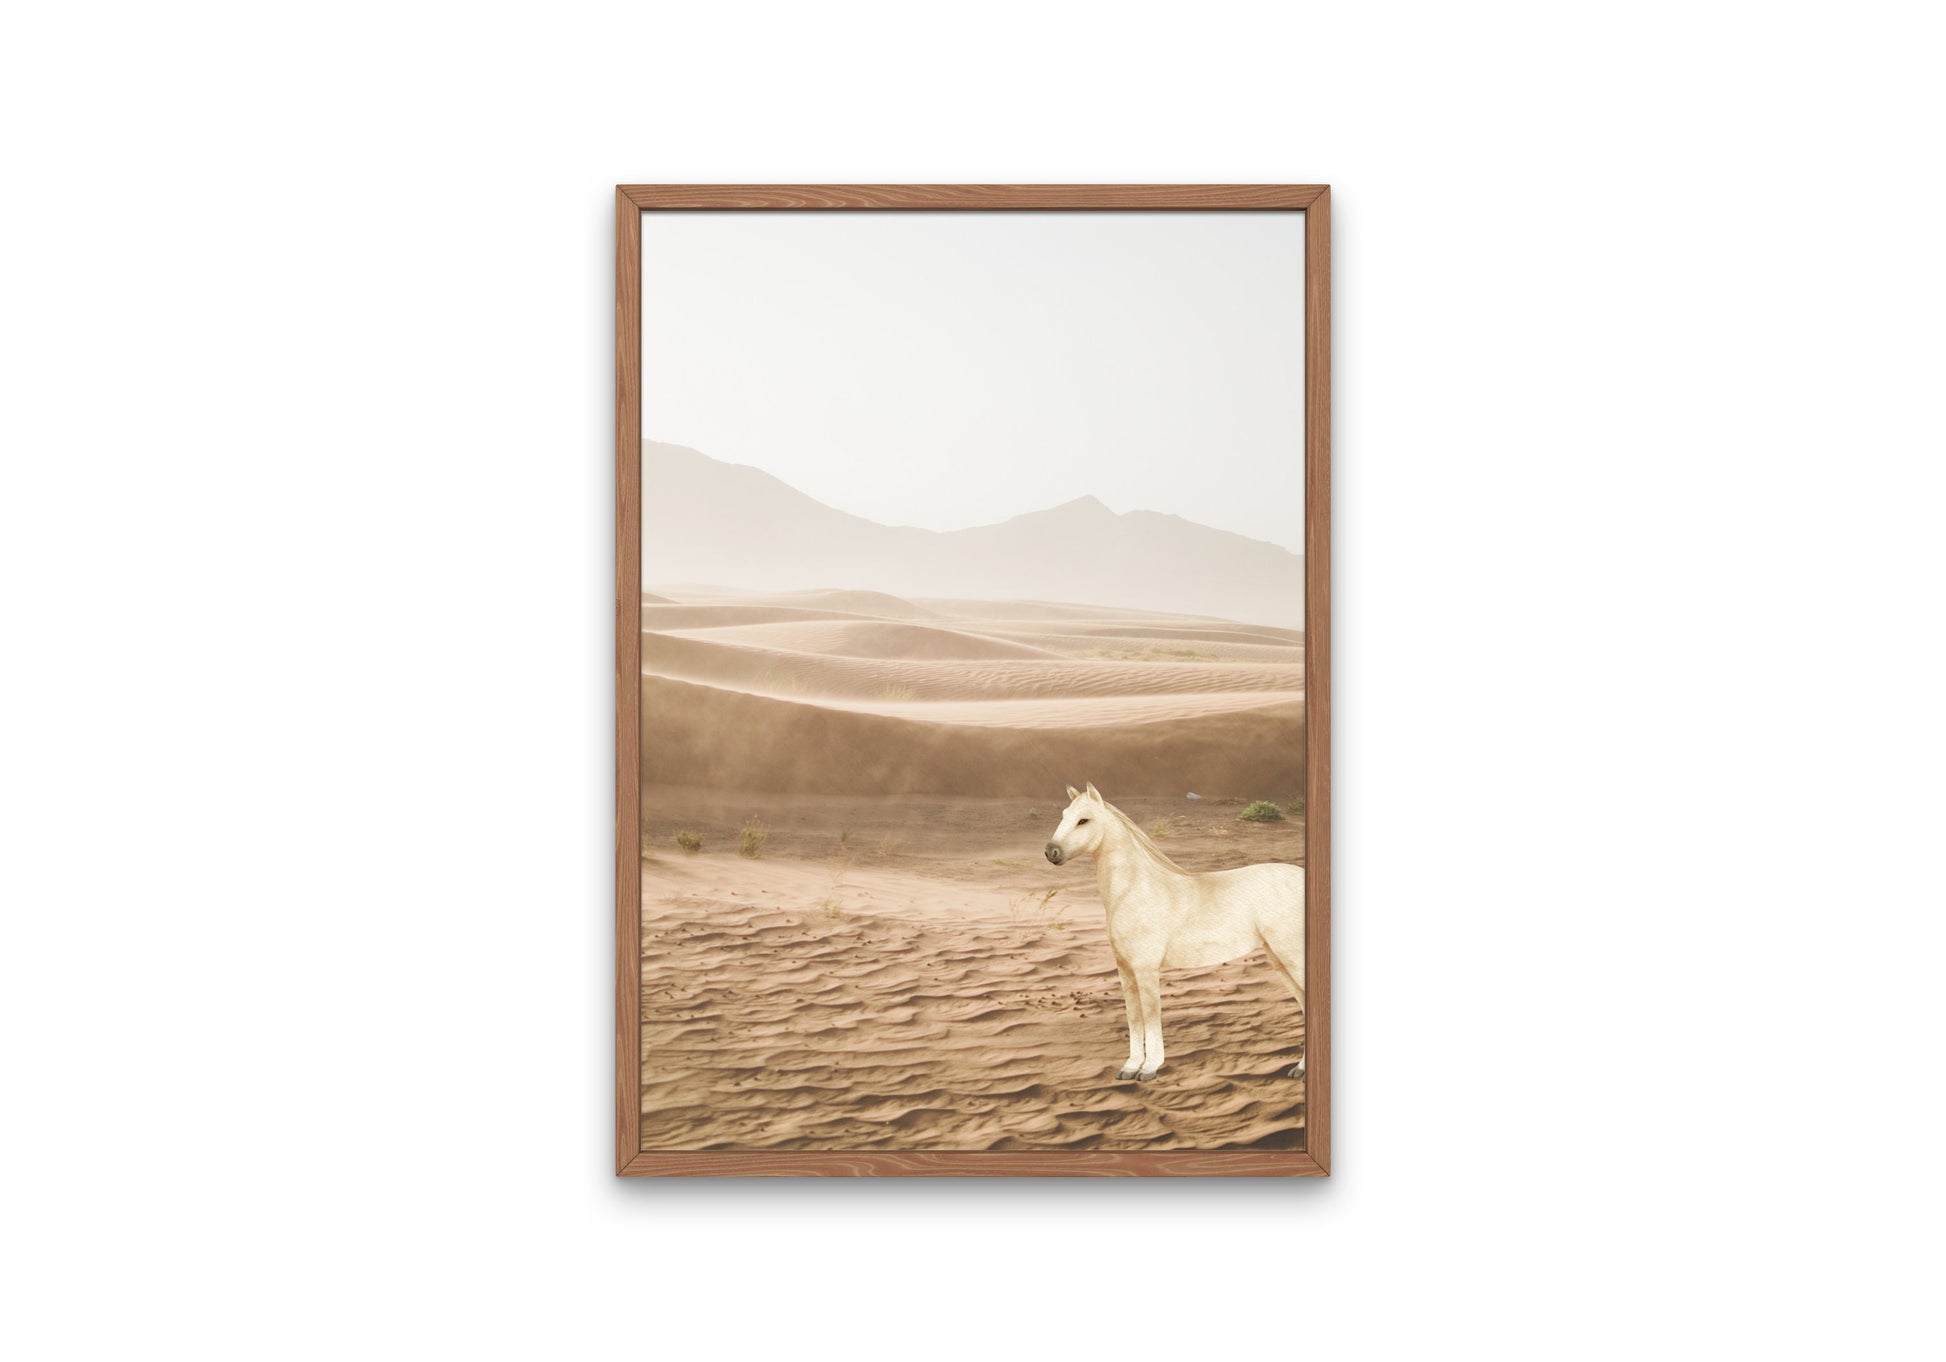 Horse in the Desert DIGITAL PRINT, Arizona Wall Art, American Rustic Country Art, Ranch Cowboy Decor, country style, Country Animal Print